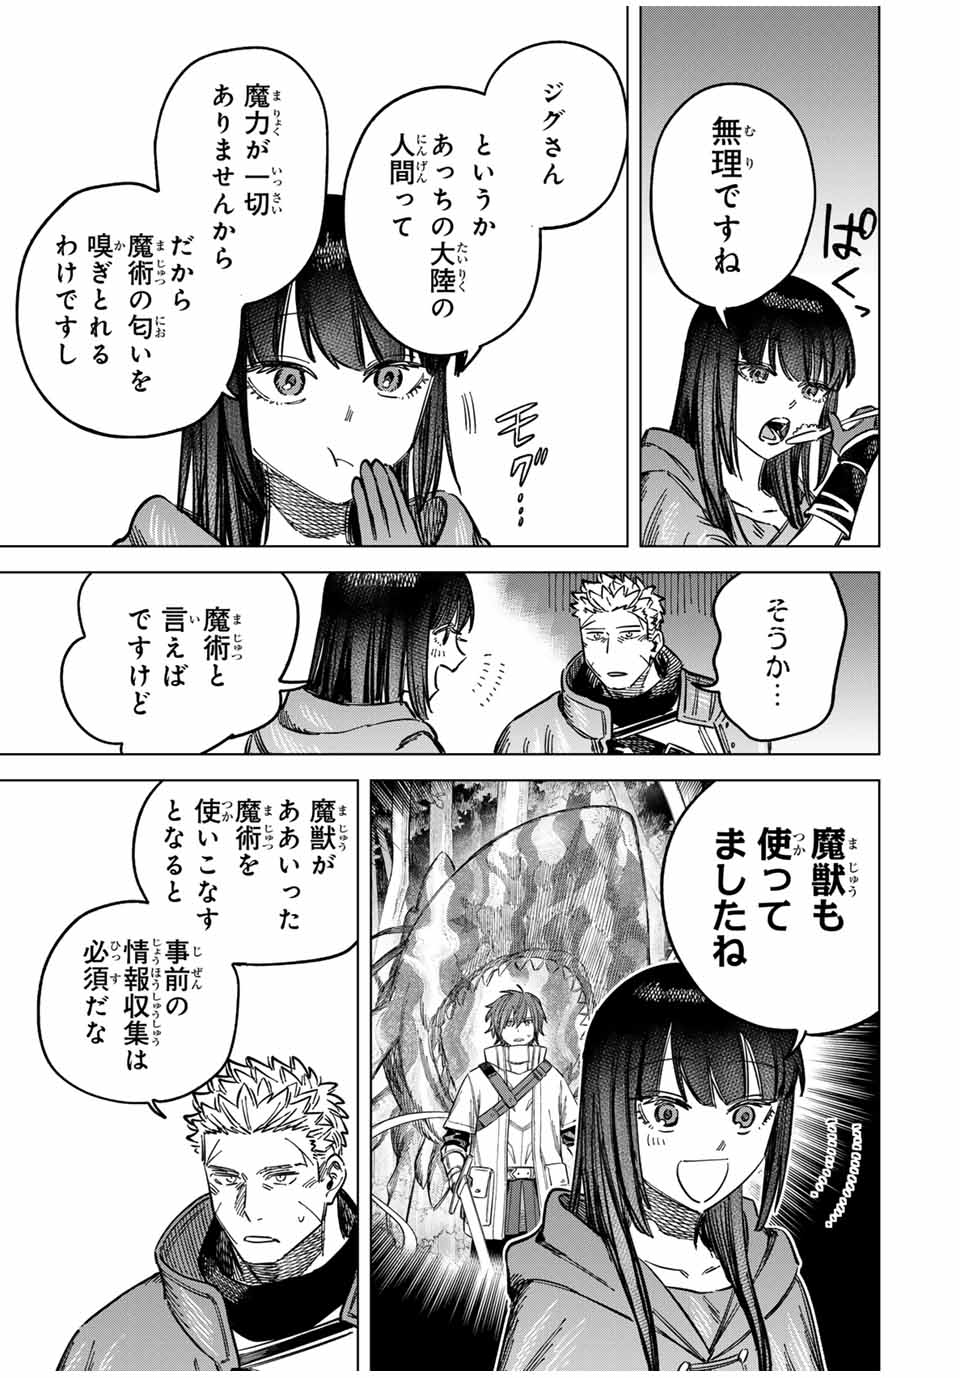 Witch and Mercenary 魔女と傭兵 第6話 - Page 11